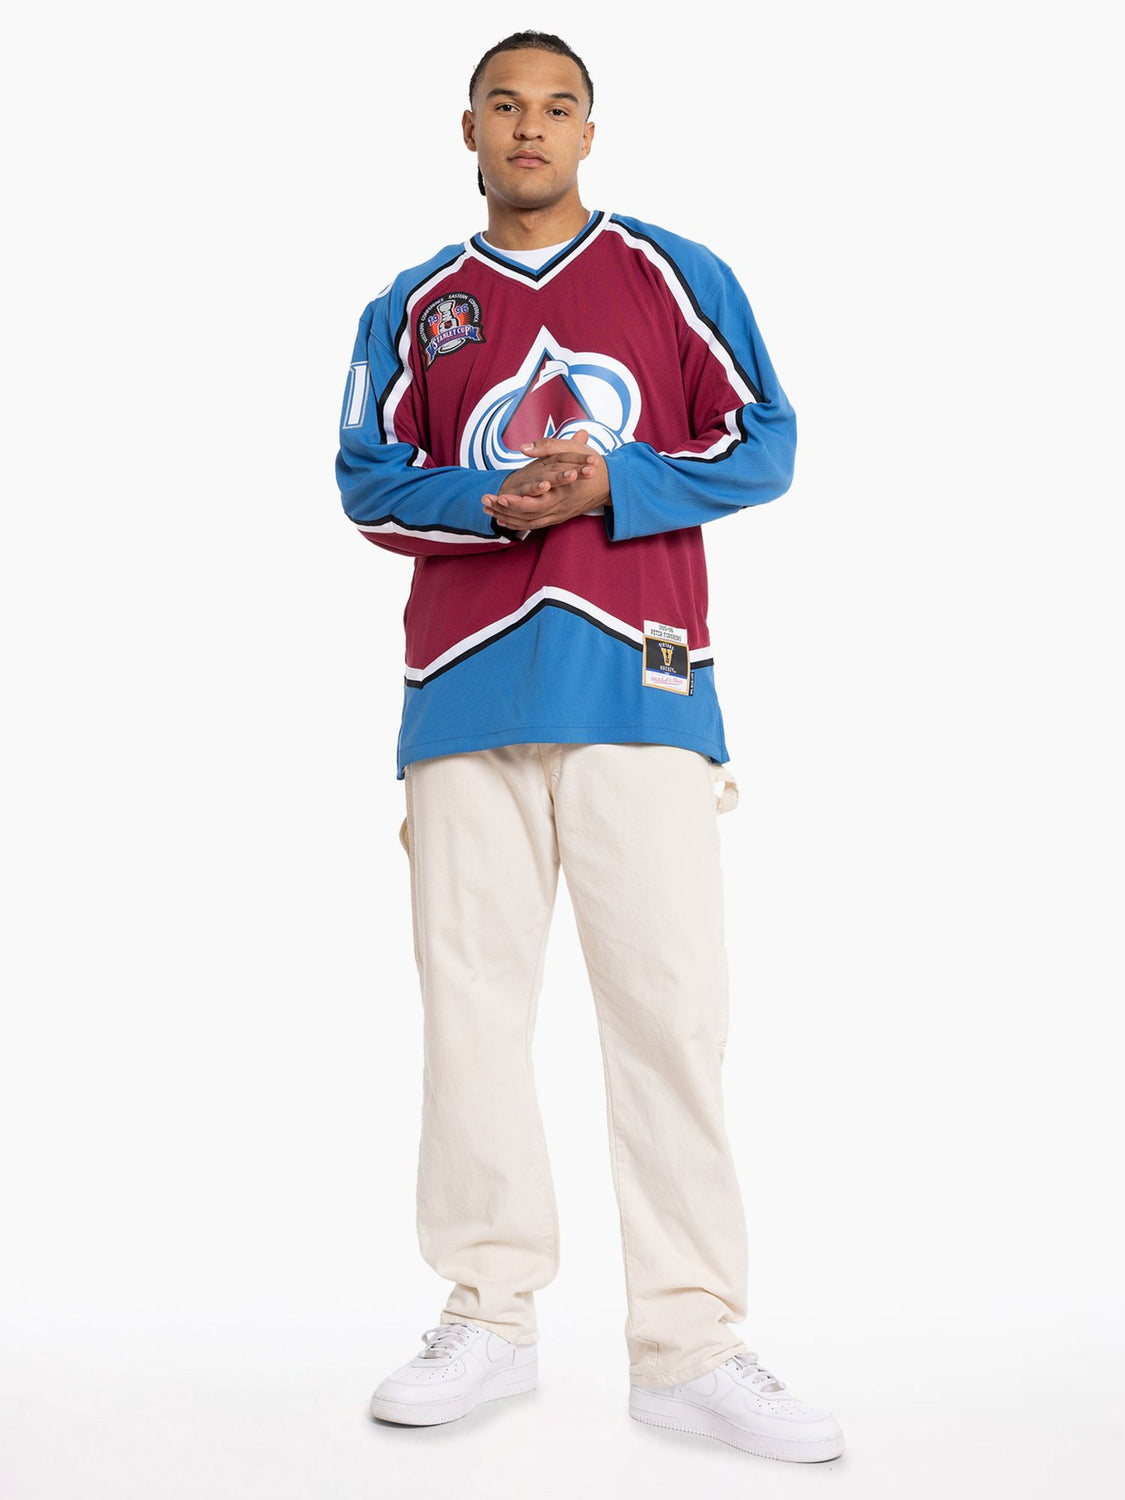 Colorado Avalanche on X: RT @NHL: If Peter Forsberg dressed for a